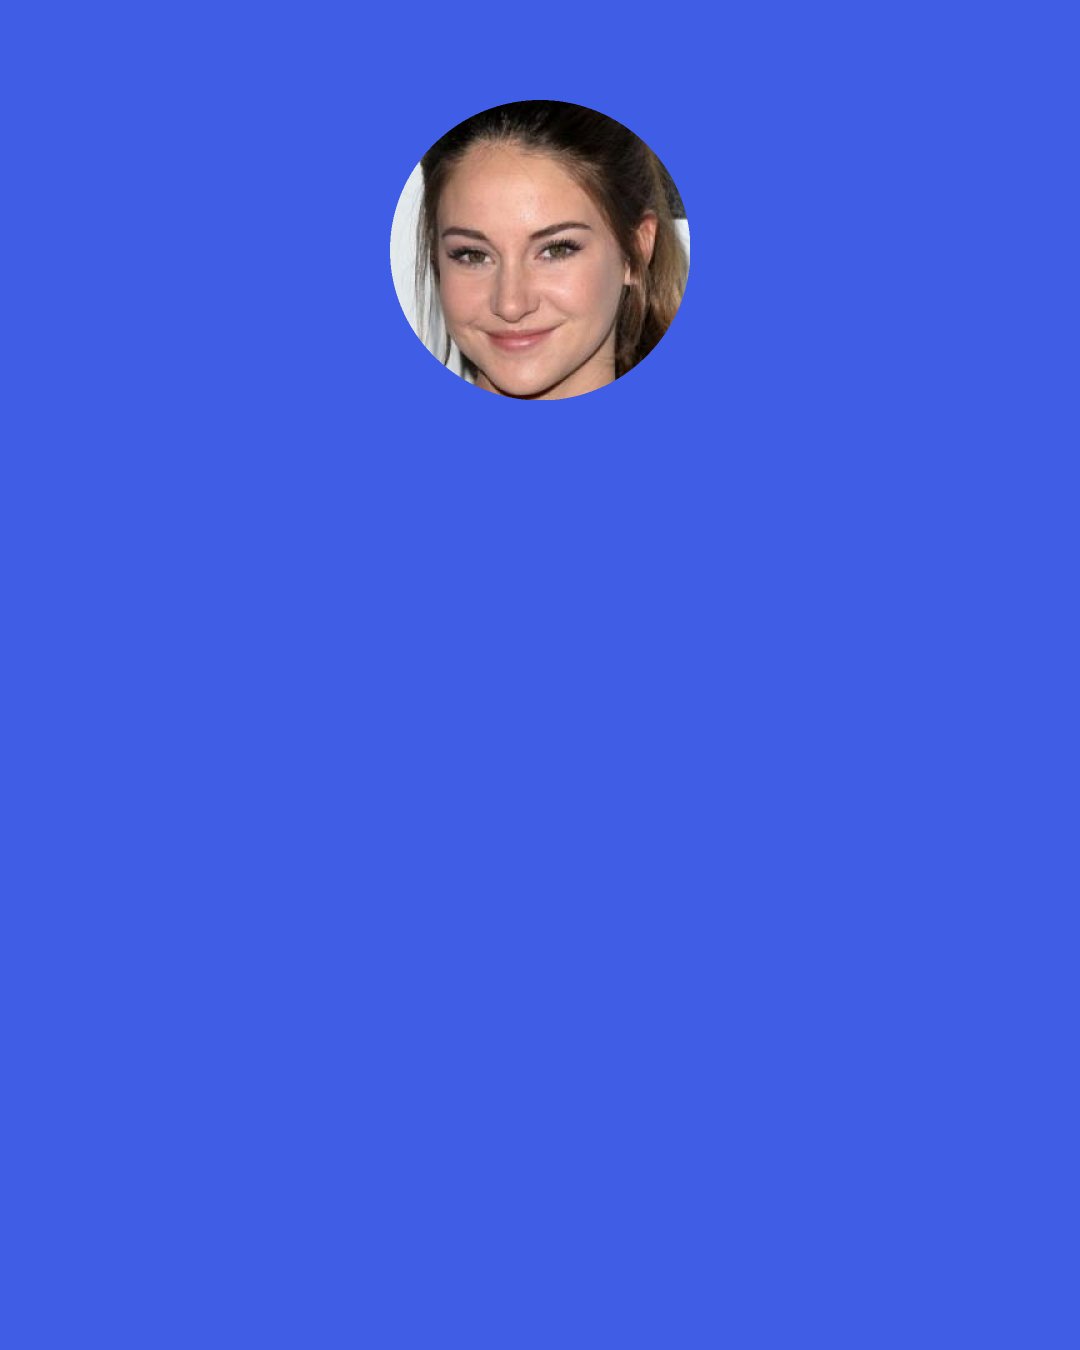 Shailene Woodley: I started studying herbalism and edible plants that existed in the wild. And then I realized, "Okay, cool. I know how to make a fire with sticks and I know how to build a shelter, but I live 90 percent of my life in an urban environment, so these skills aren't really going to help me because there aren't trees that grow in Los Angeles that I can just take a branch and make fire out of, because that wood isn't conducive for that. So I started learning urban survival skills.